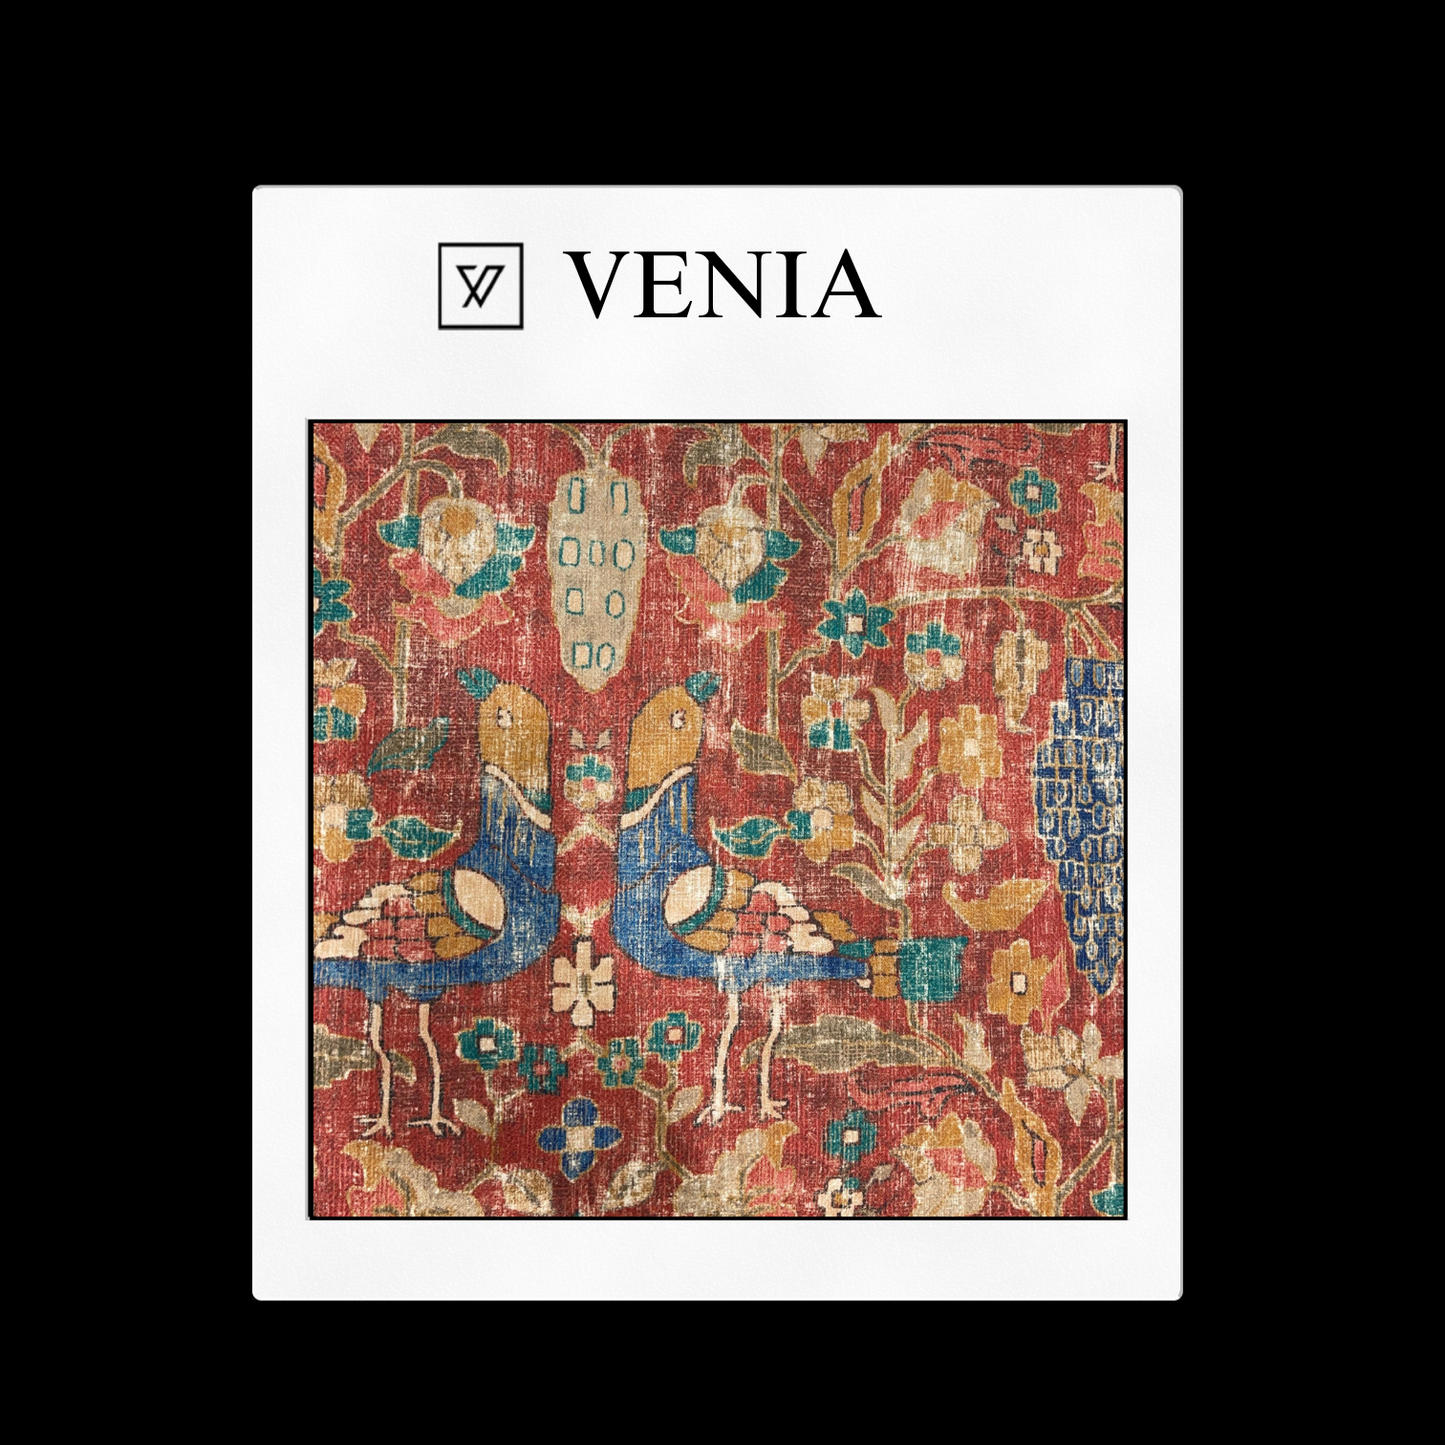 piece of curtain and upholstery fabric on a 'VENIA' monogrammed mockup